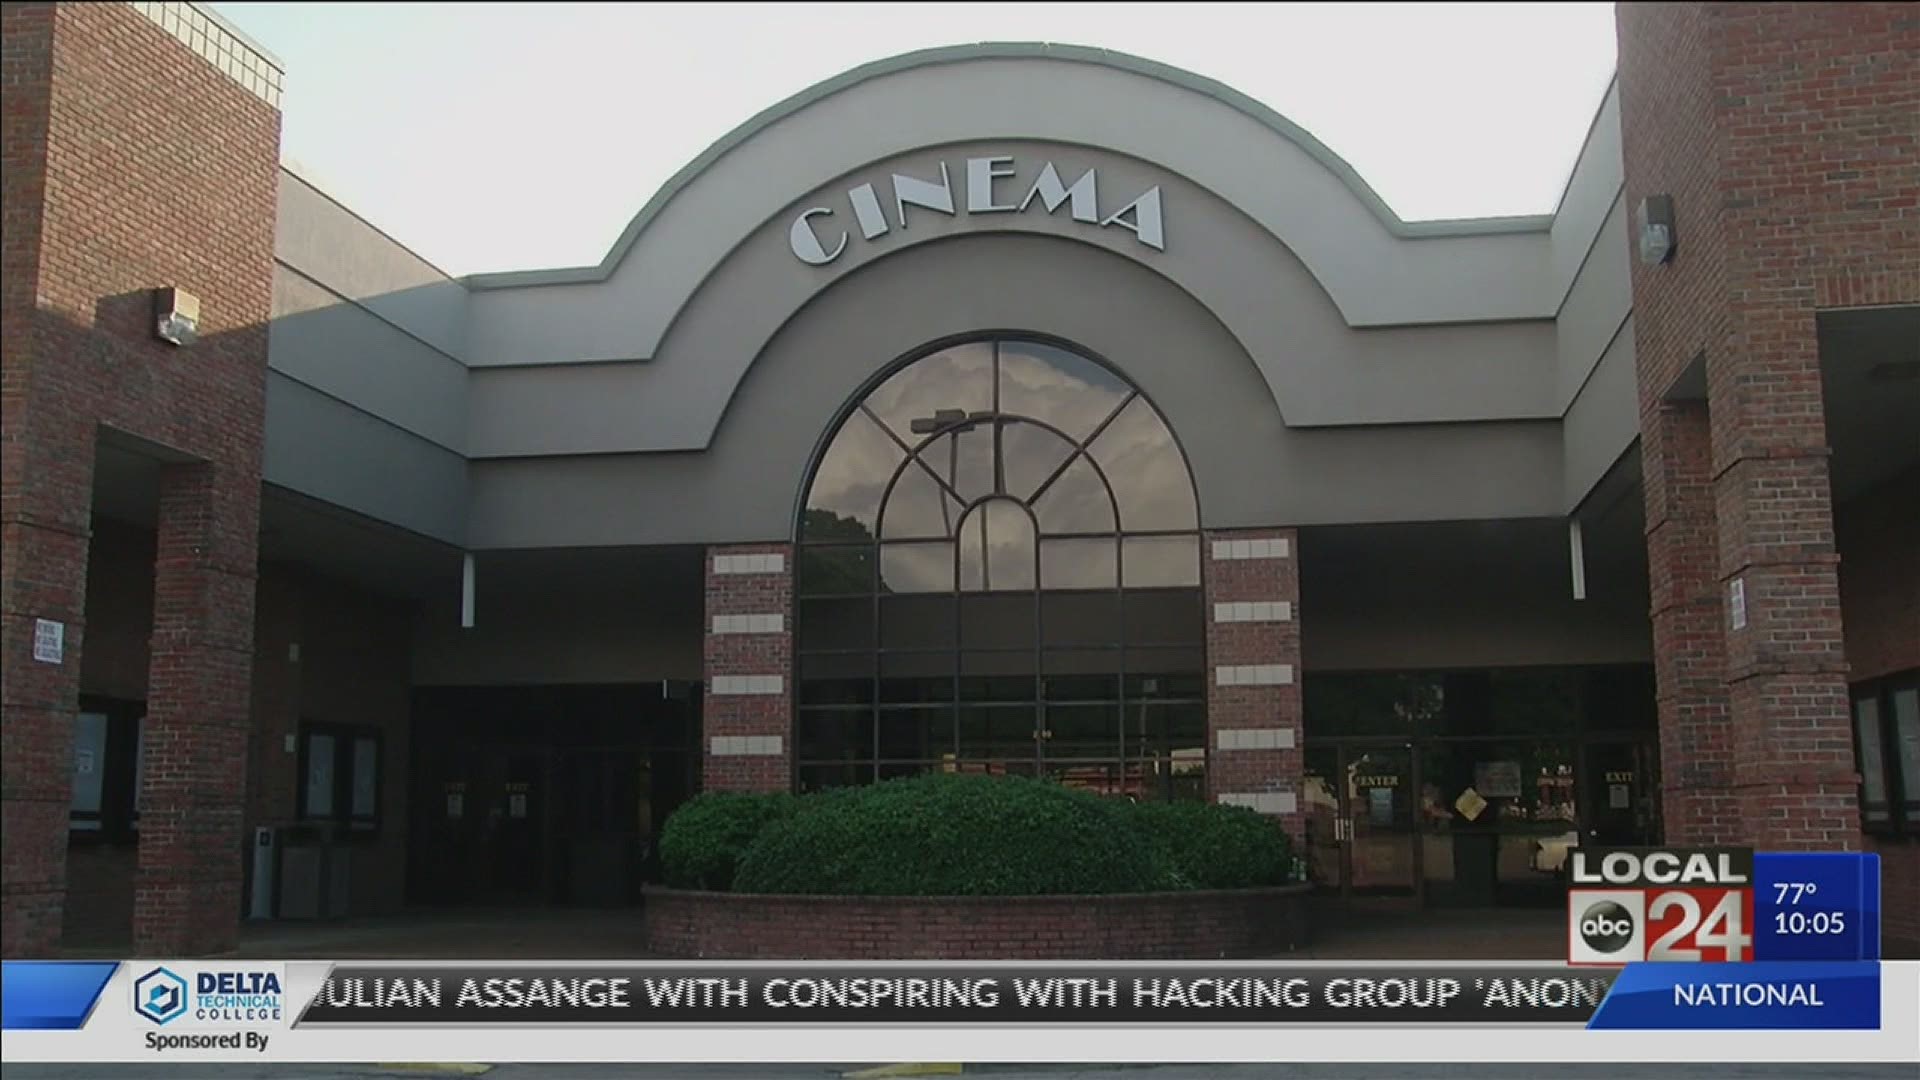 Movie theaters set to Memphis reopen during COVID-19 pandemic | 11alive.com